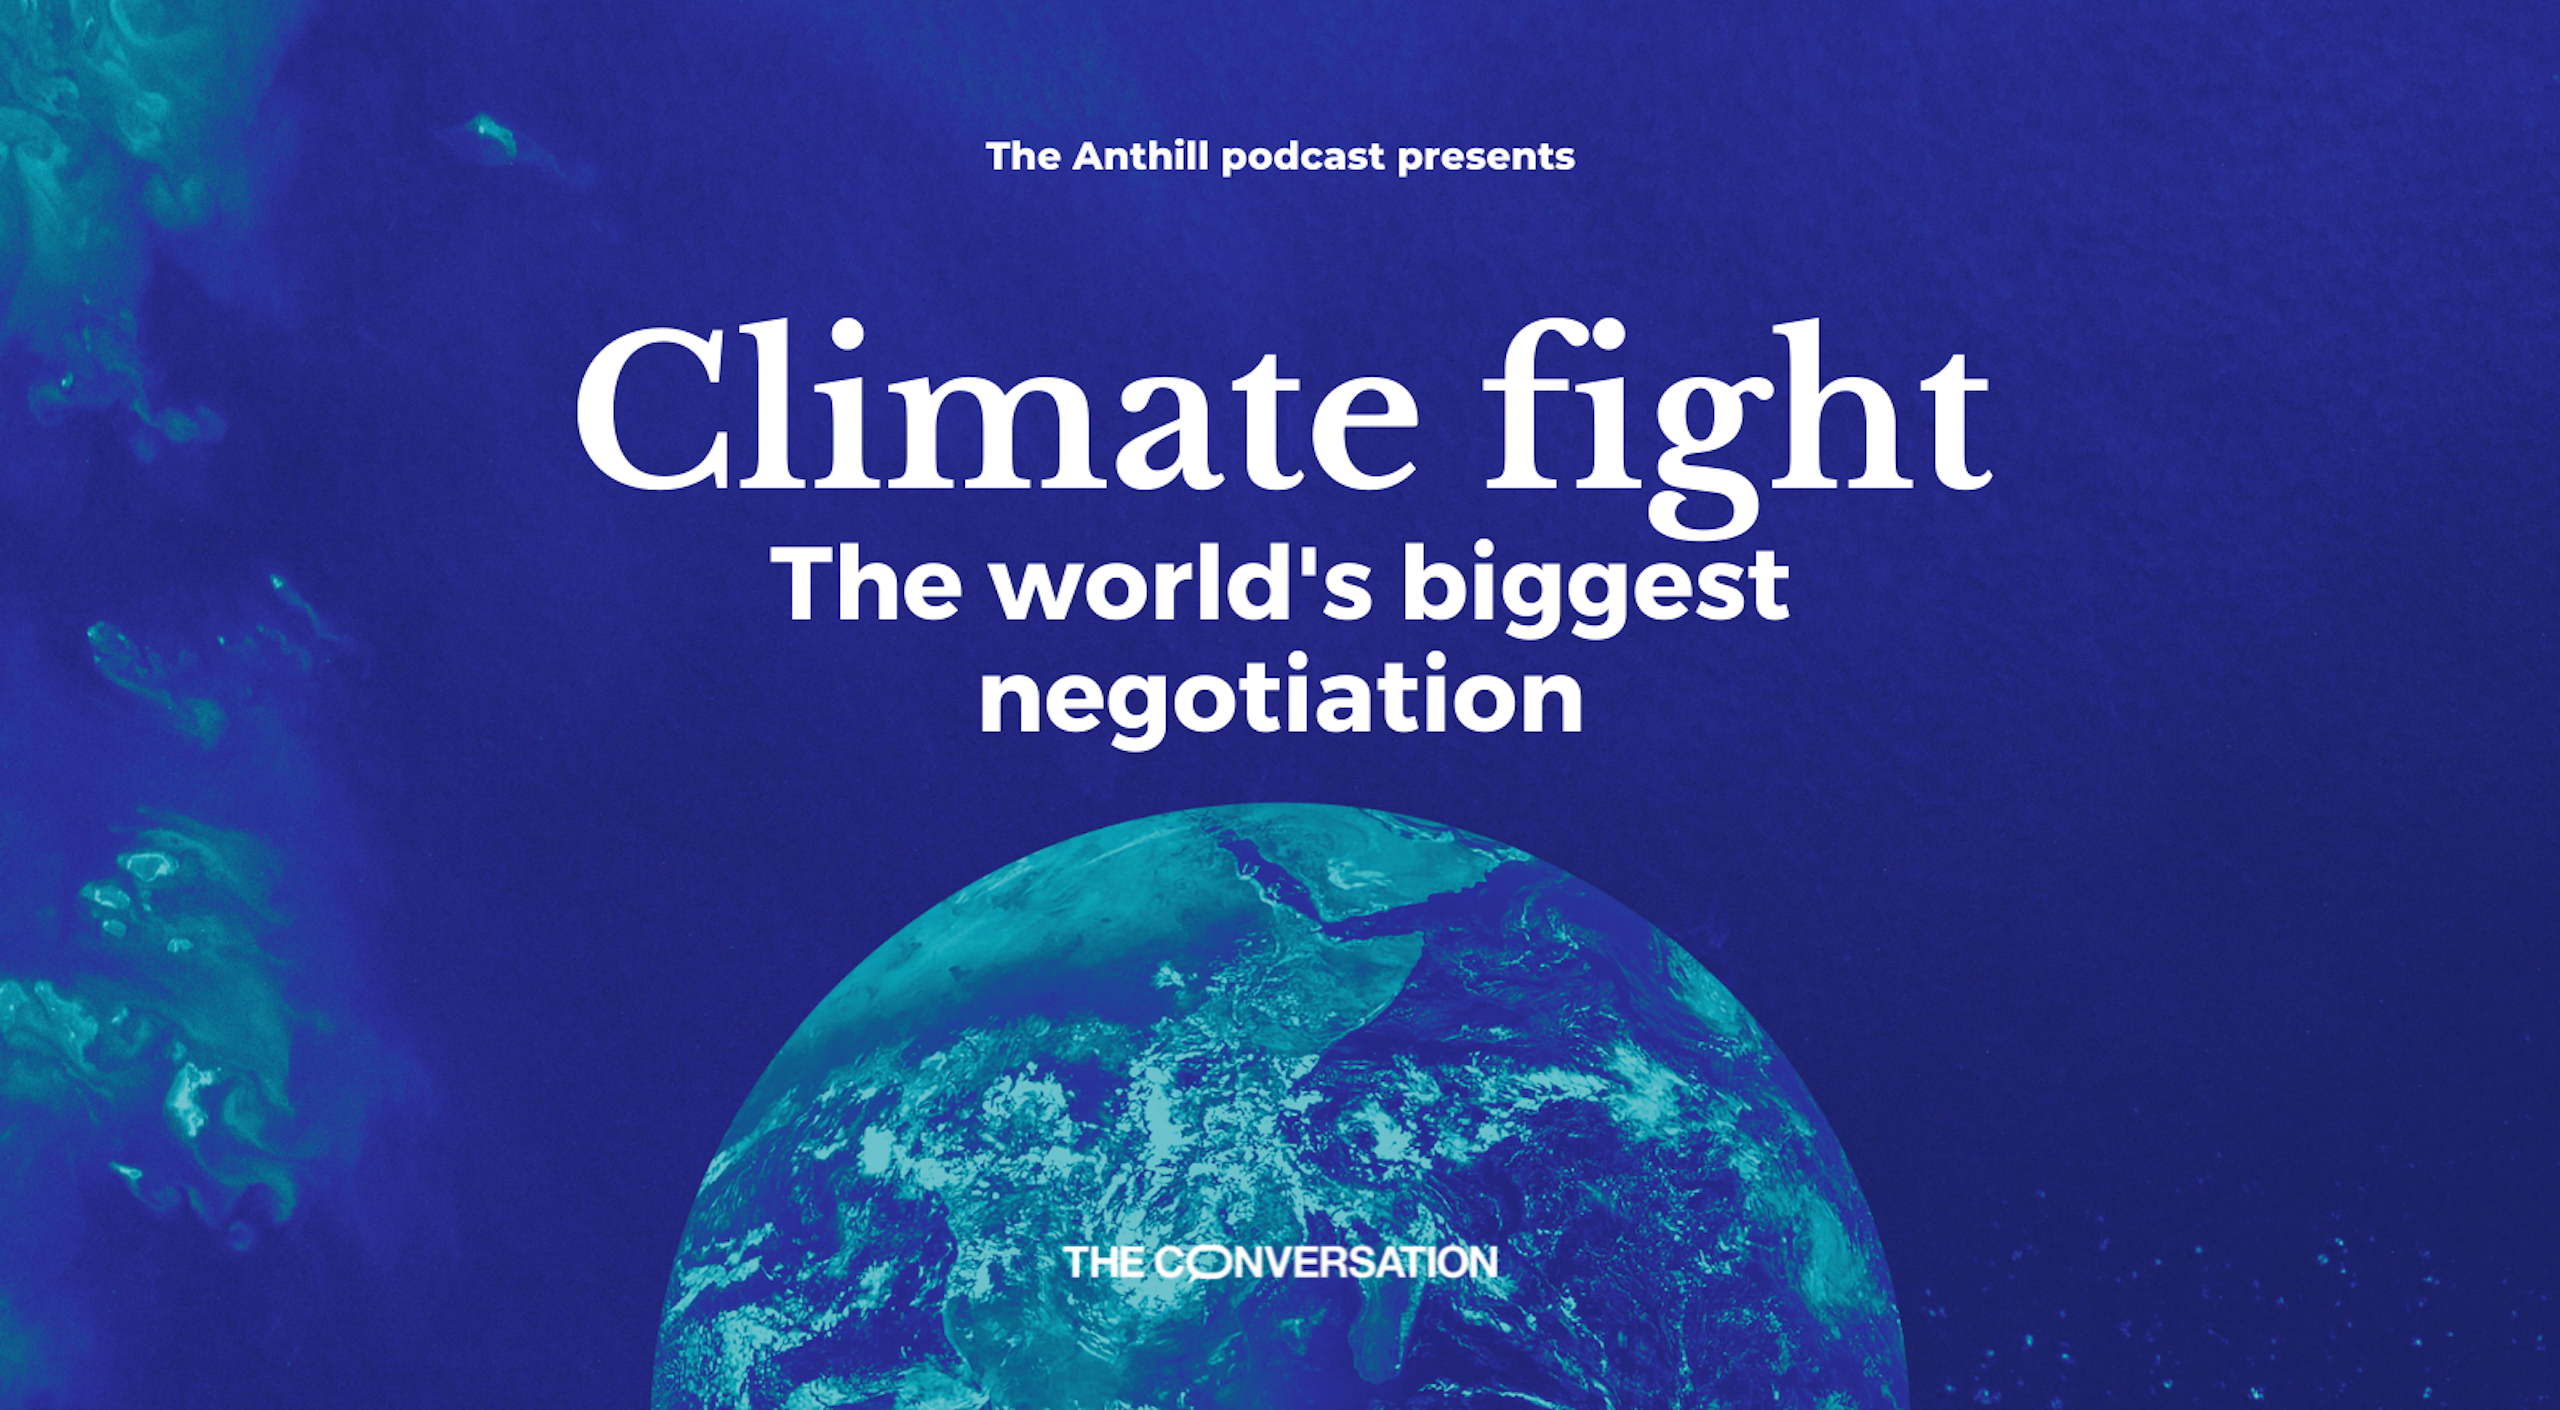 Promotional artwork for Climate Fight podcast series